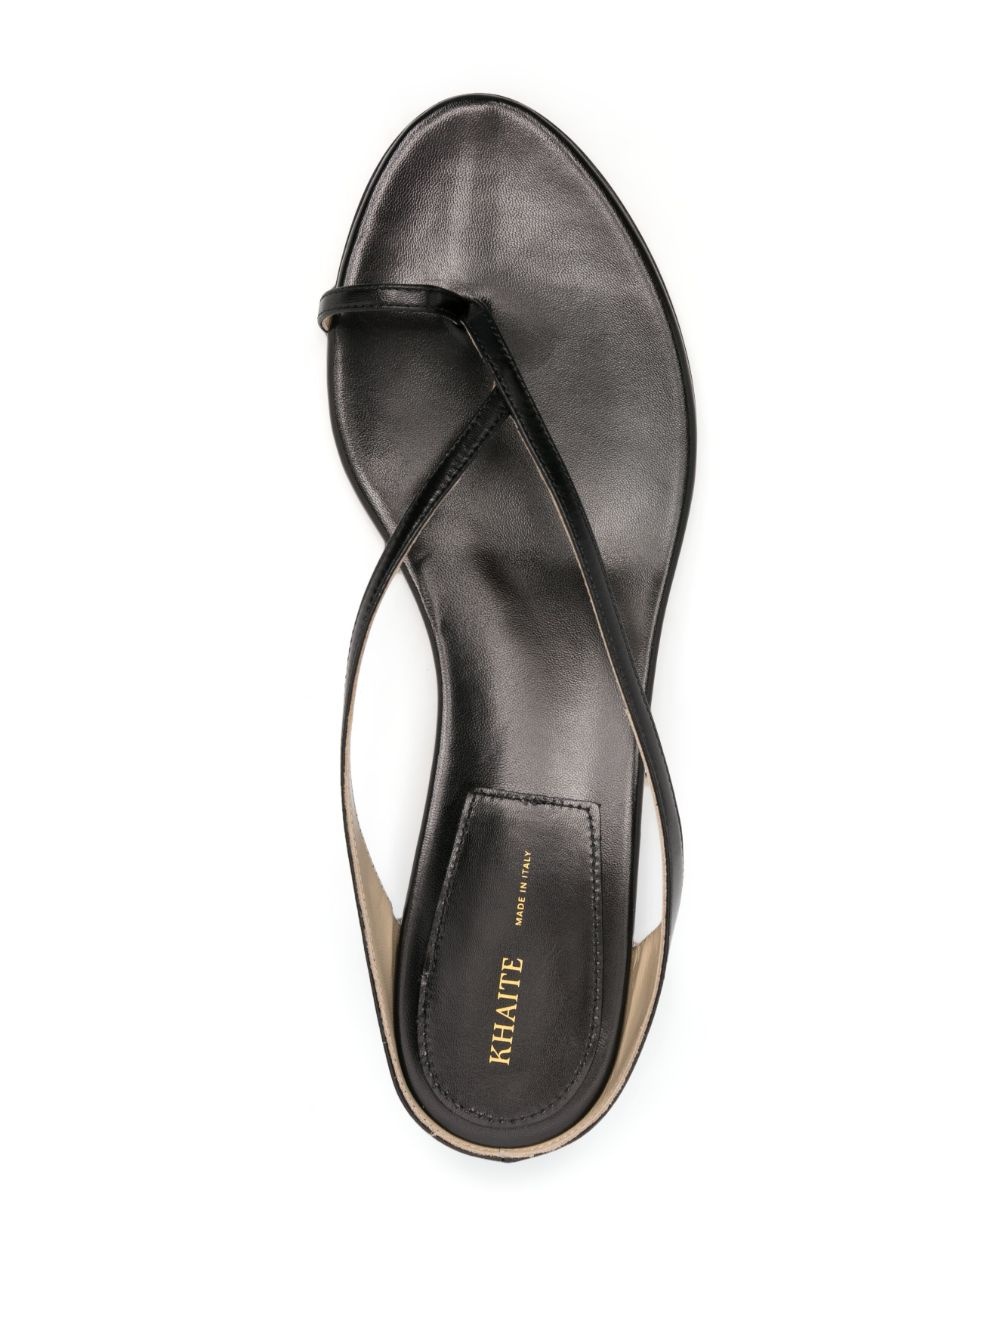 Marion leather flat sandals - 4